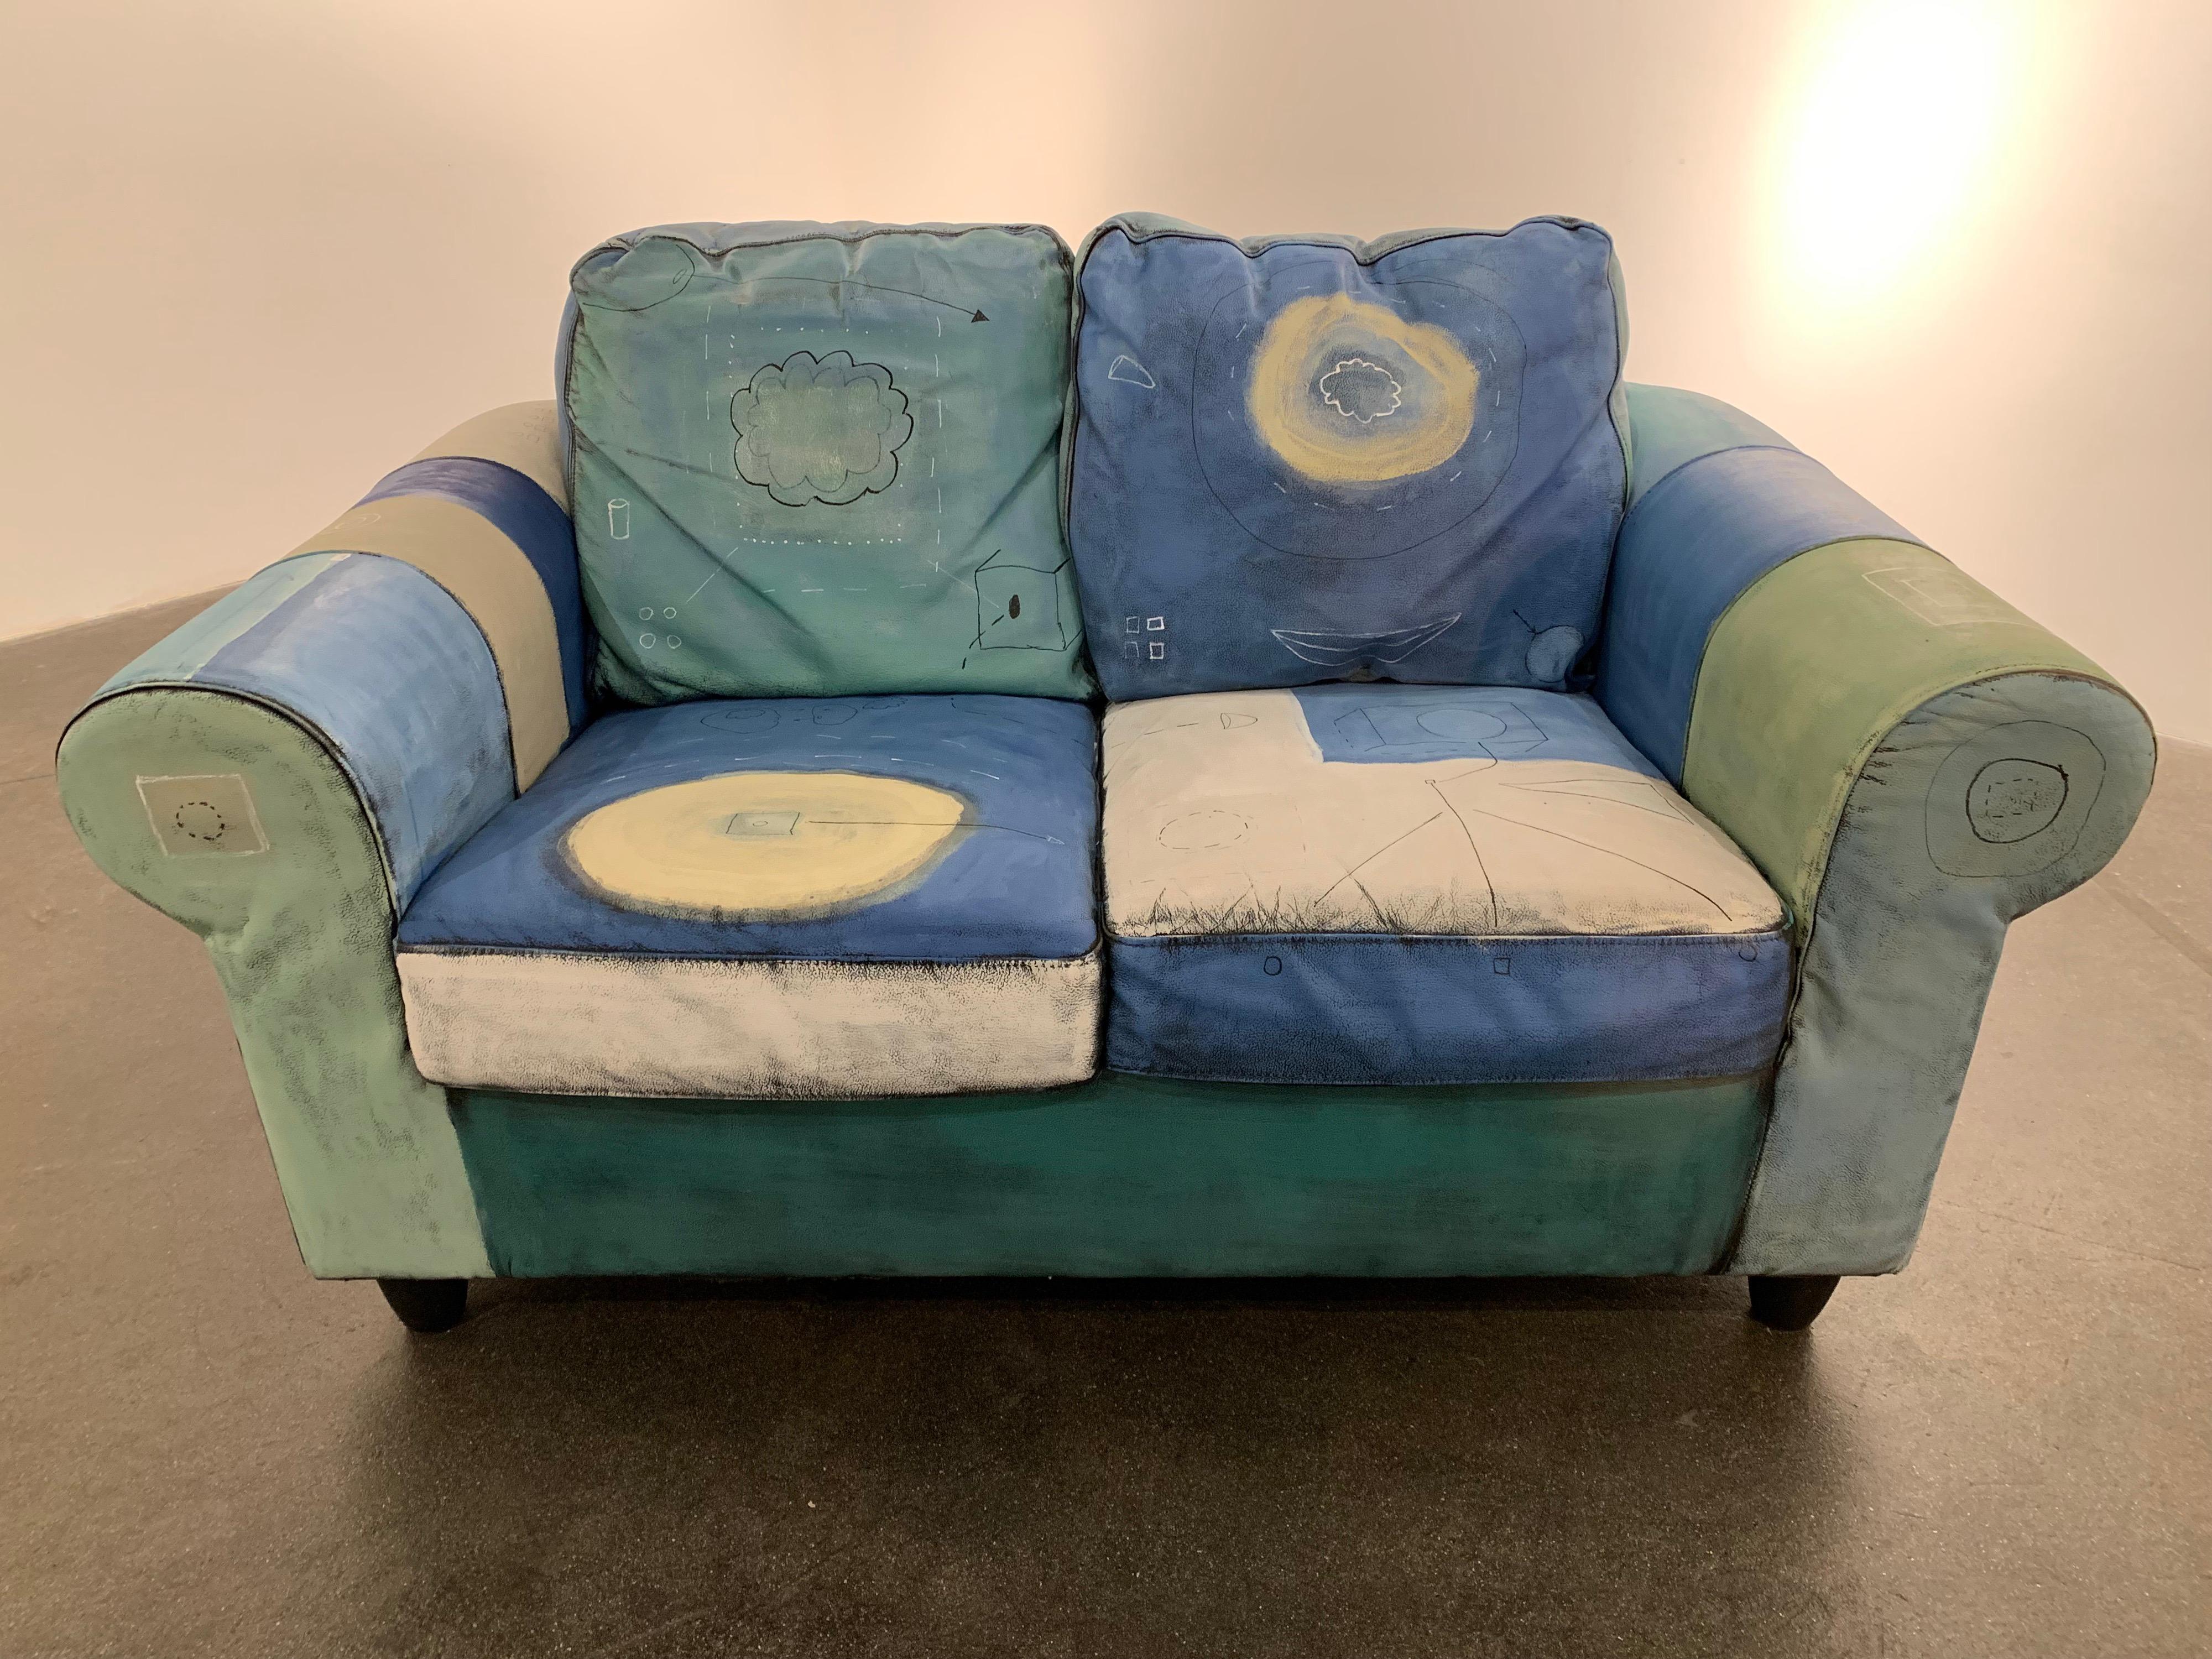 Input and Output, hand painted functional couch / loveseat - Art by Airom